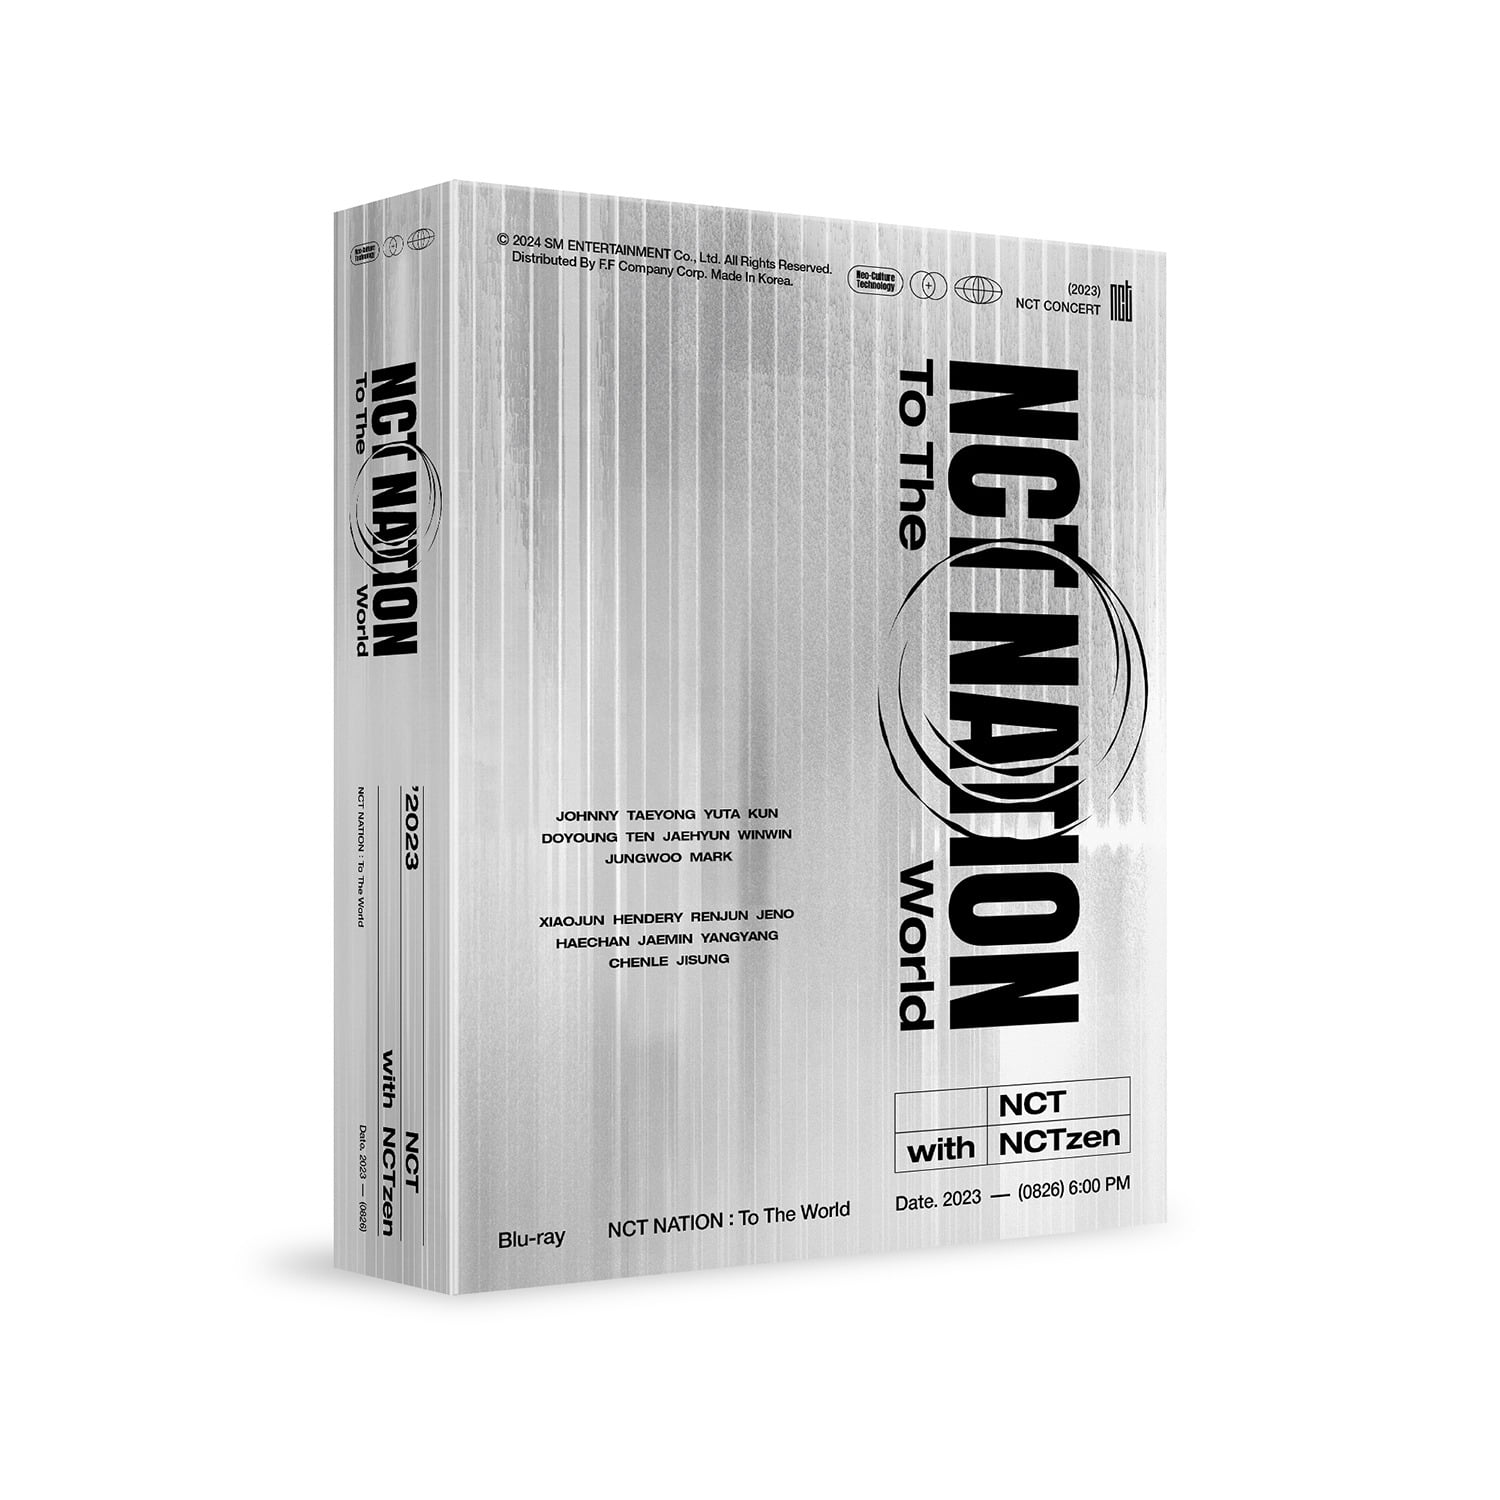 NCT - 2023 NCT CONCERT [NCT NATION : To The World in INCHEON DVD] (특전 오리지널 티켓(단체 1종) 증정)